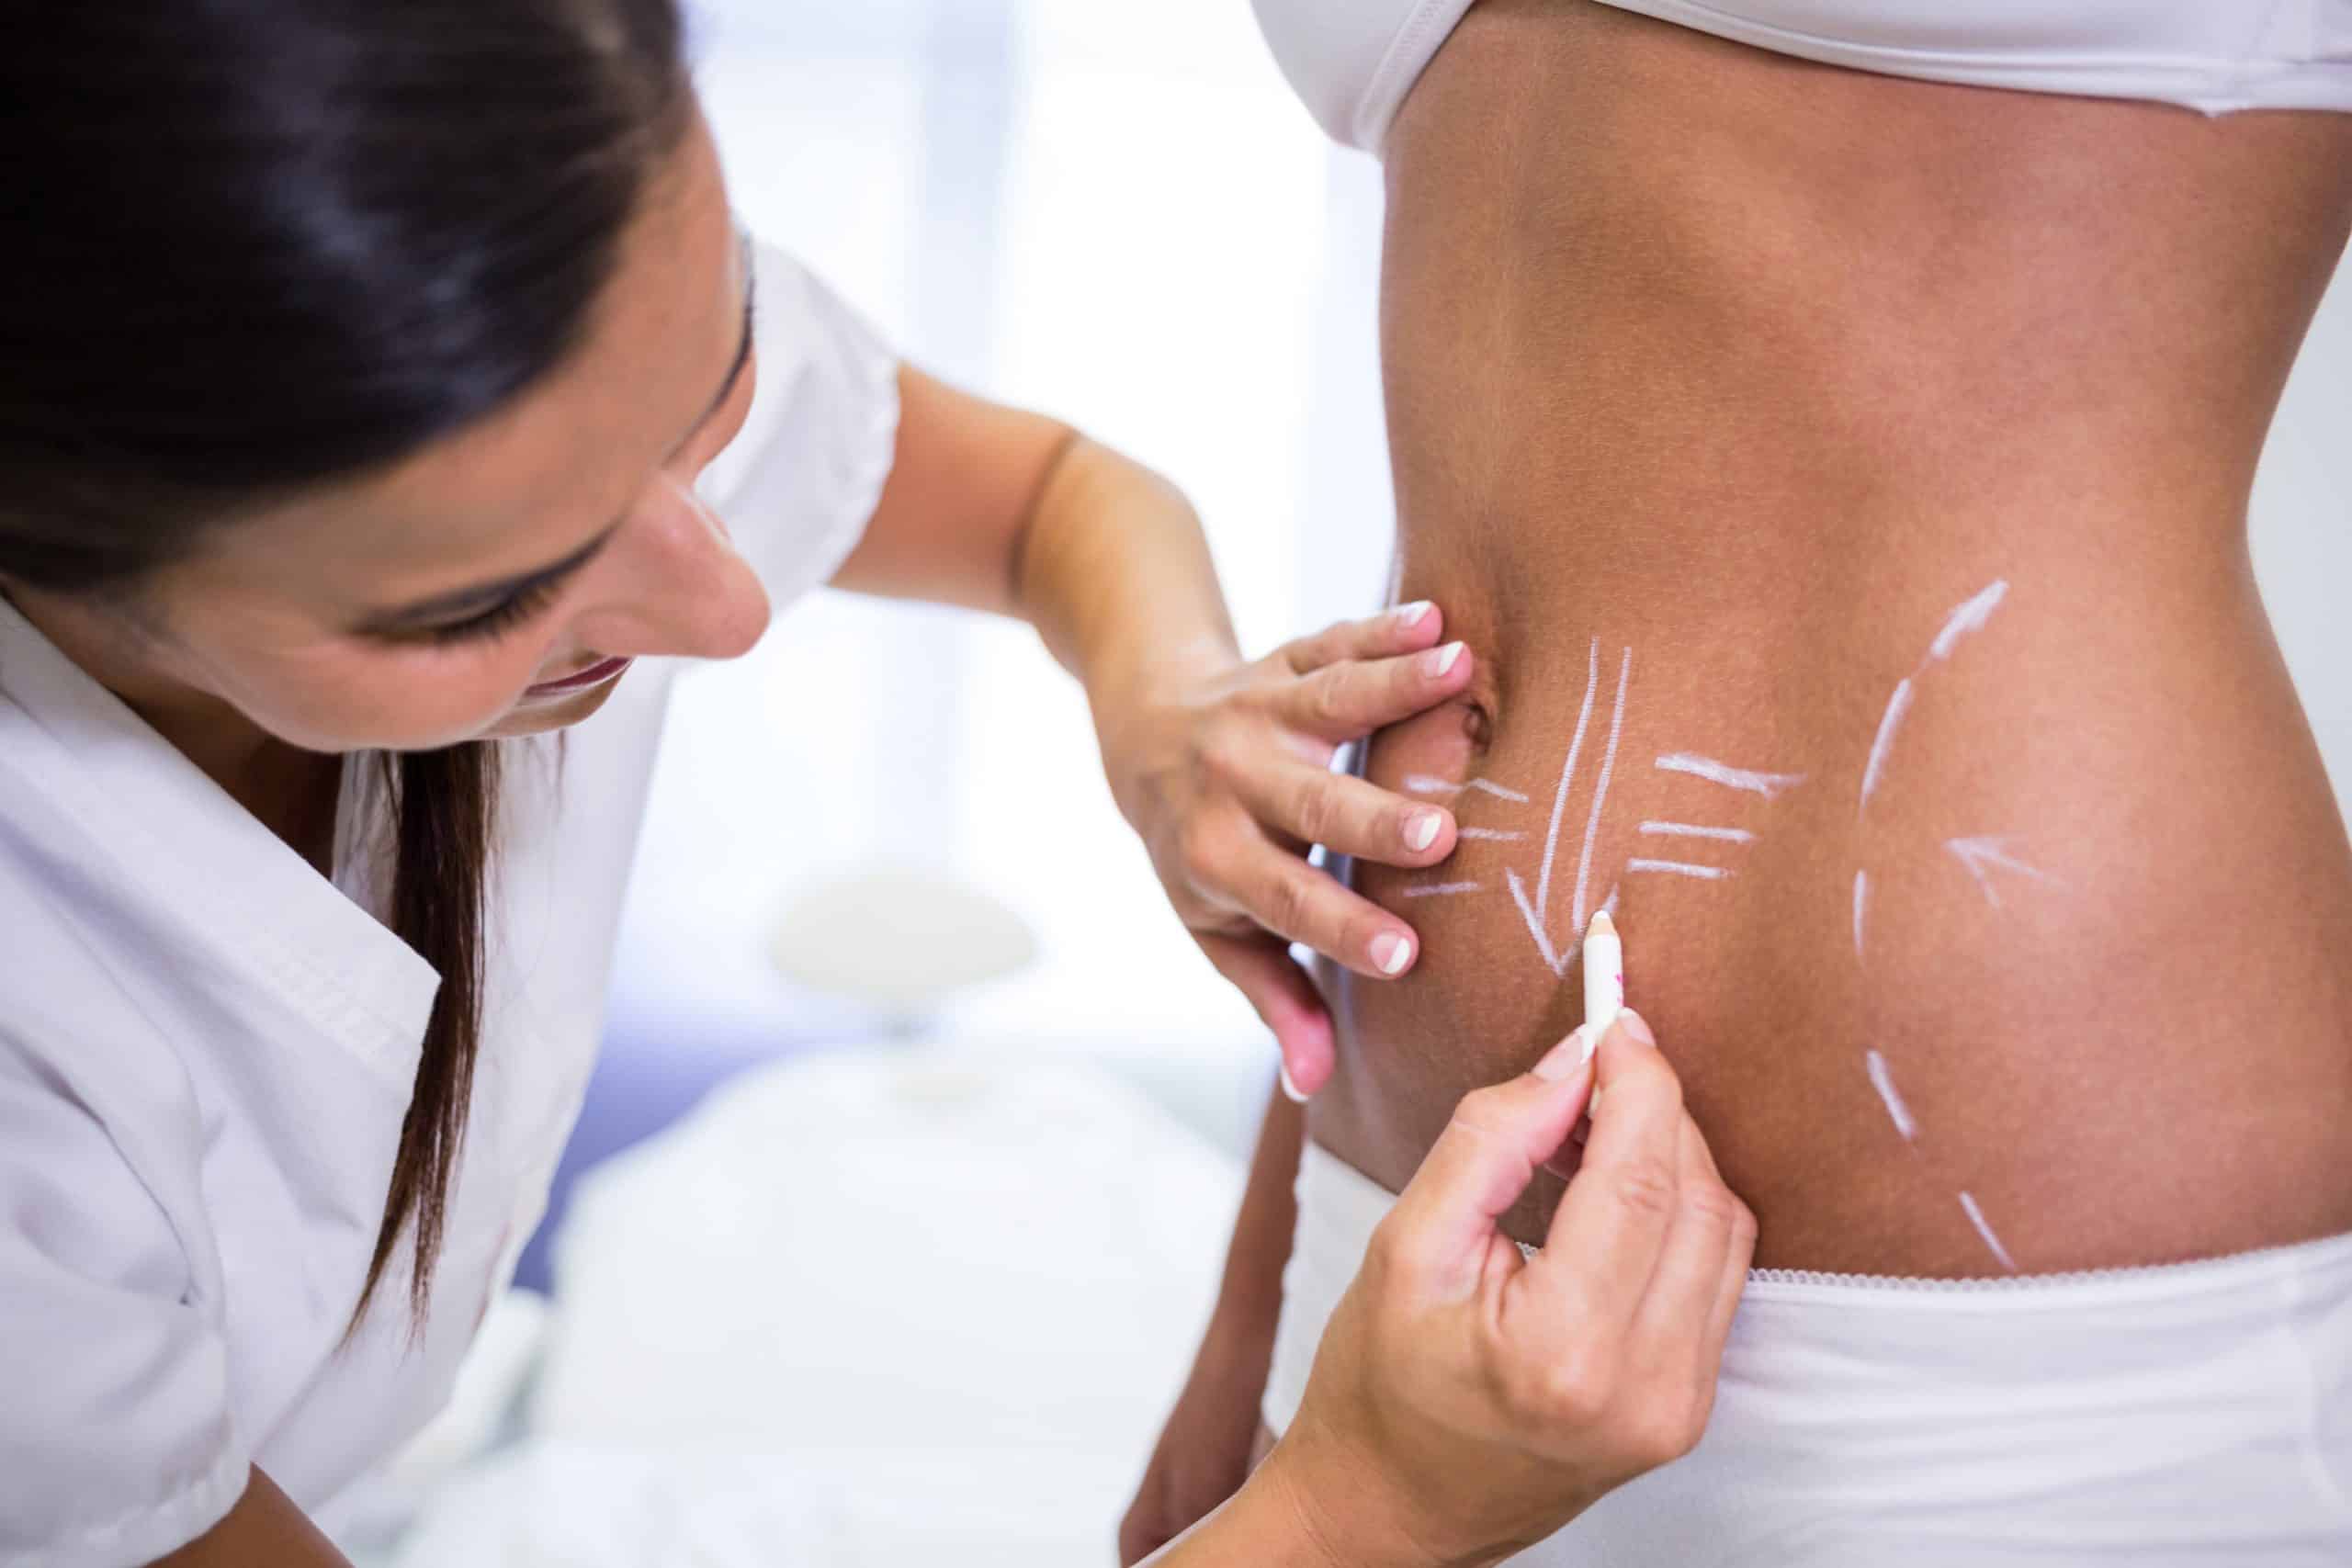 surgeon drawing lines on woman's abdomen for liposuction